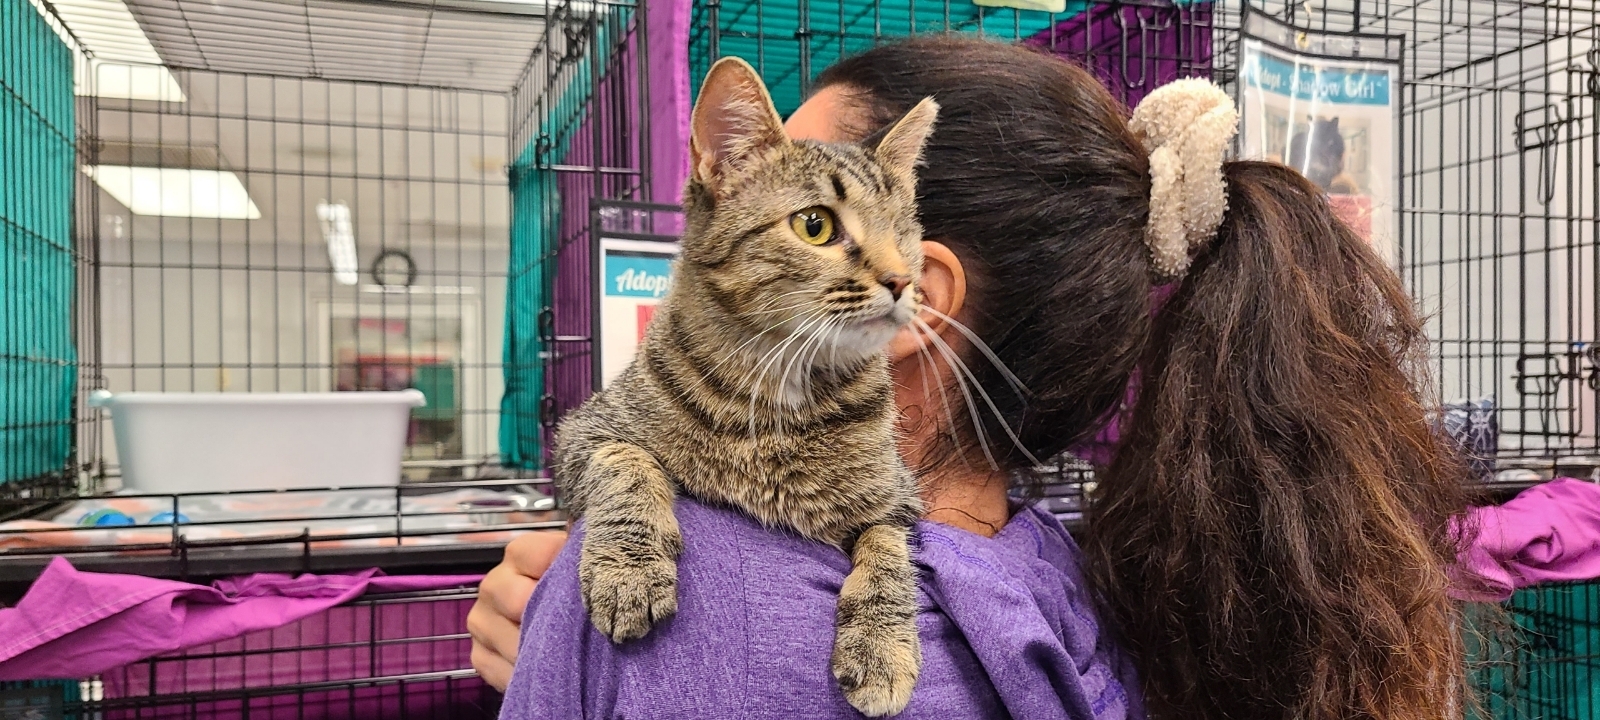 A tan and grey striped cat, recently removed from his holding pen at Petco, looks attentively over the shoulder of the volunteer cradling it in her arms.